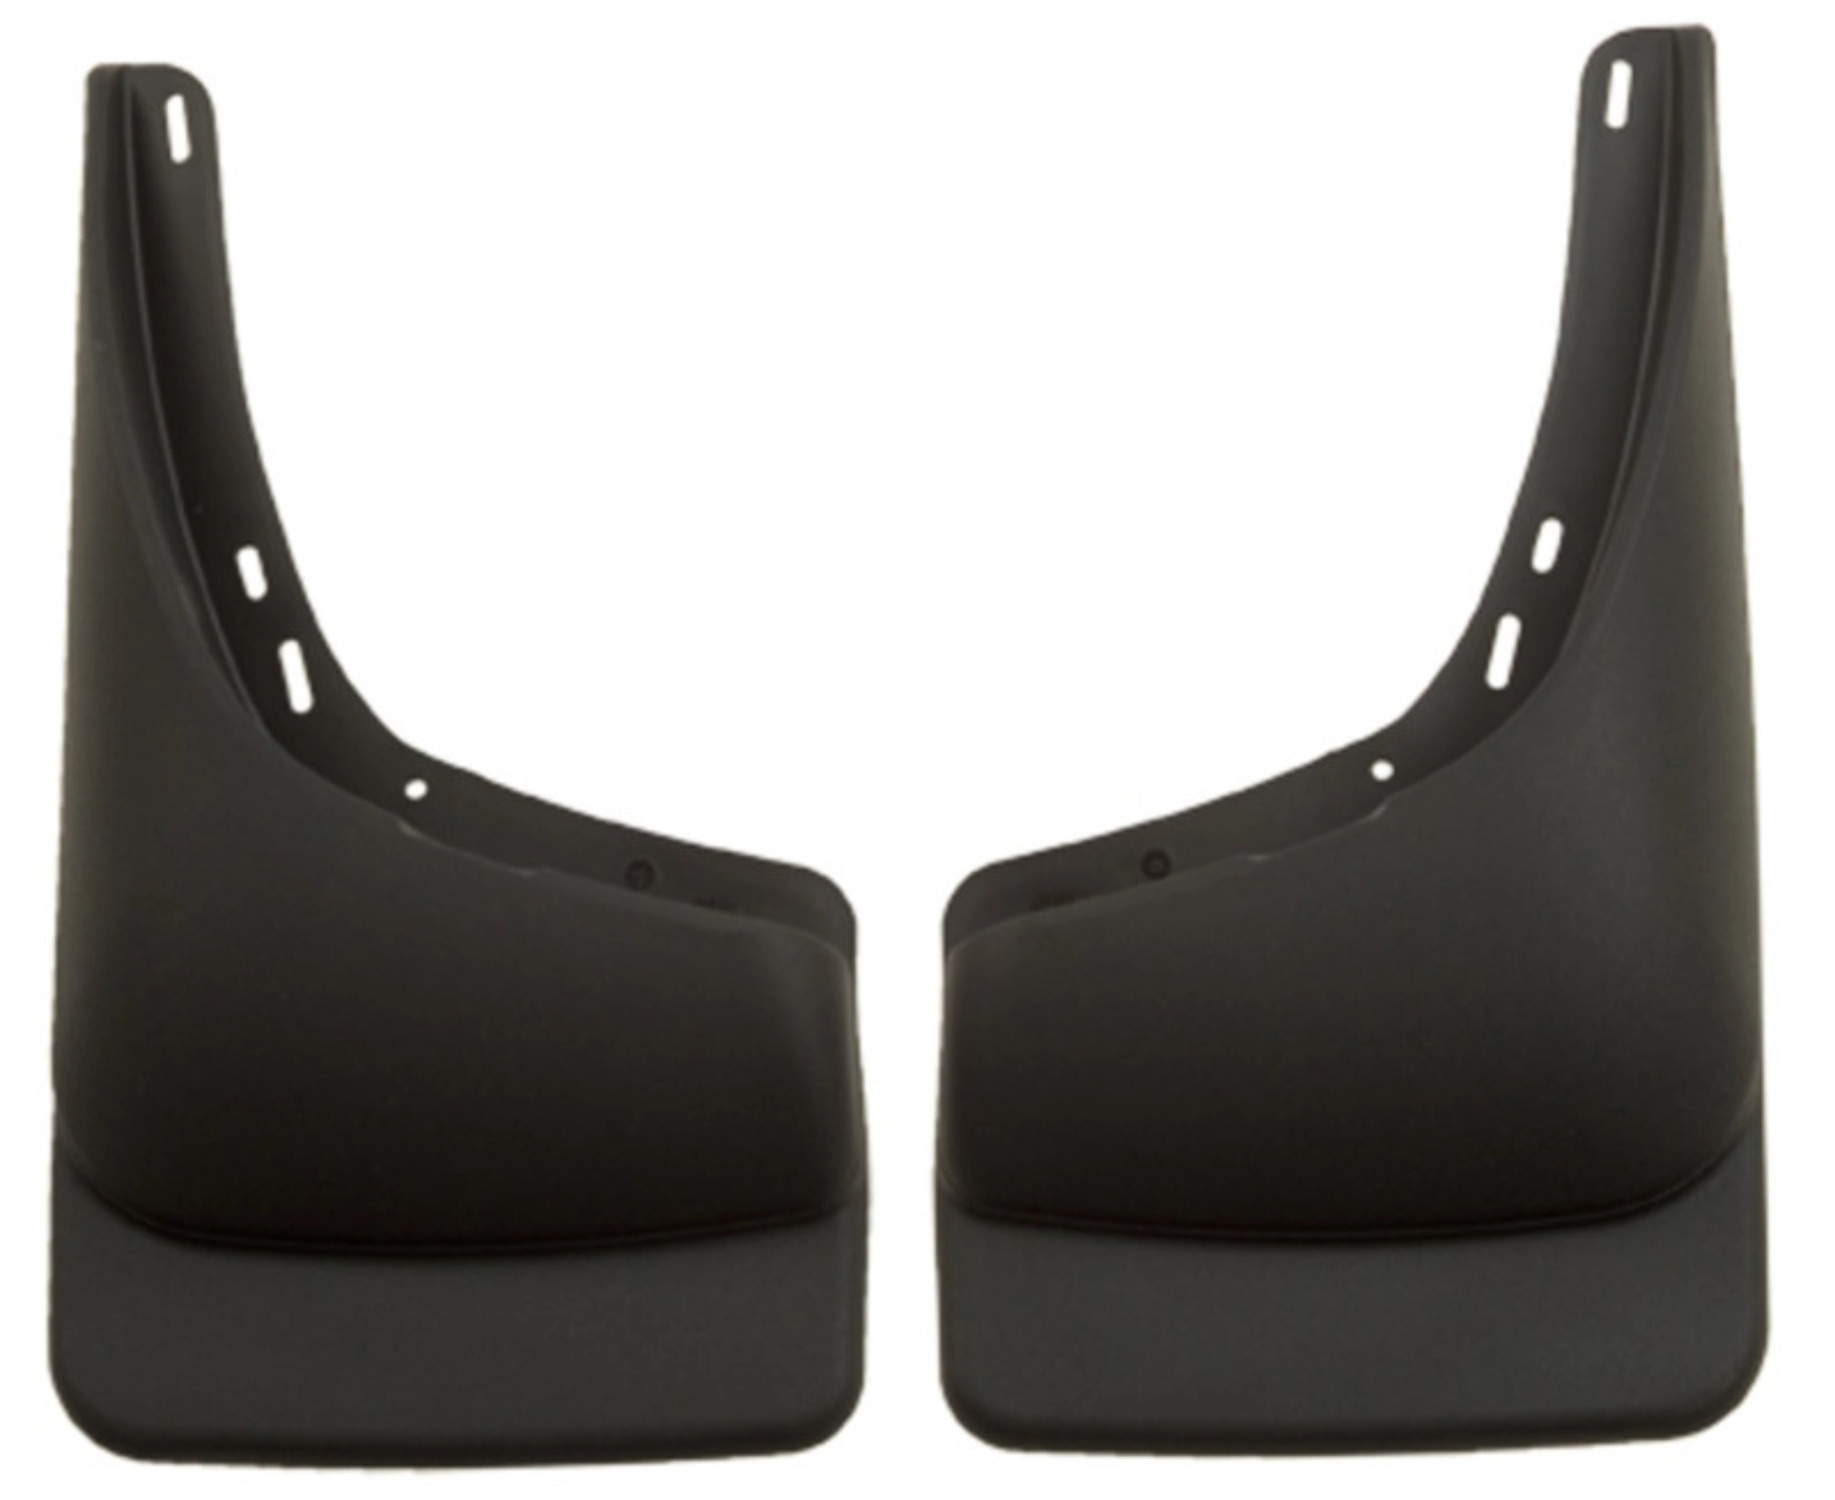 Husky by RealTruck Custom Mud Guards Rear Mud Guards Black Compatible with 97-04 Dodge Dakota Vehicle Has OE Fender Flares Compatible with select: 1998-2003 Dodge Durango - image 2 of 11